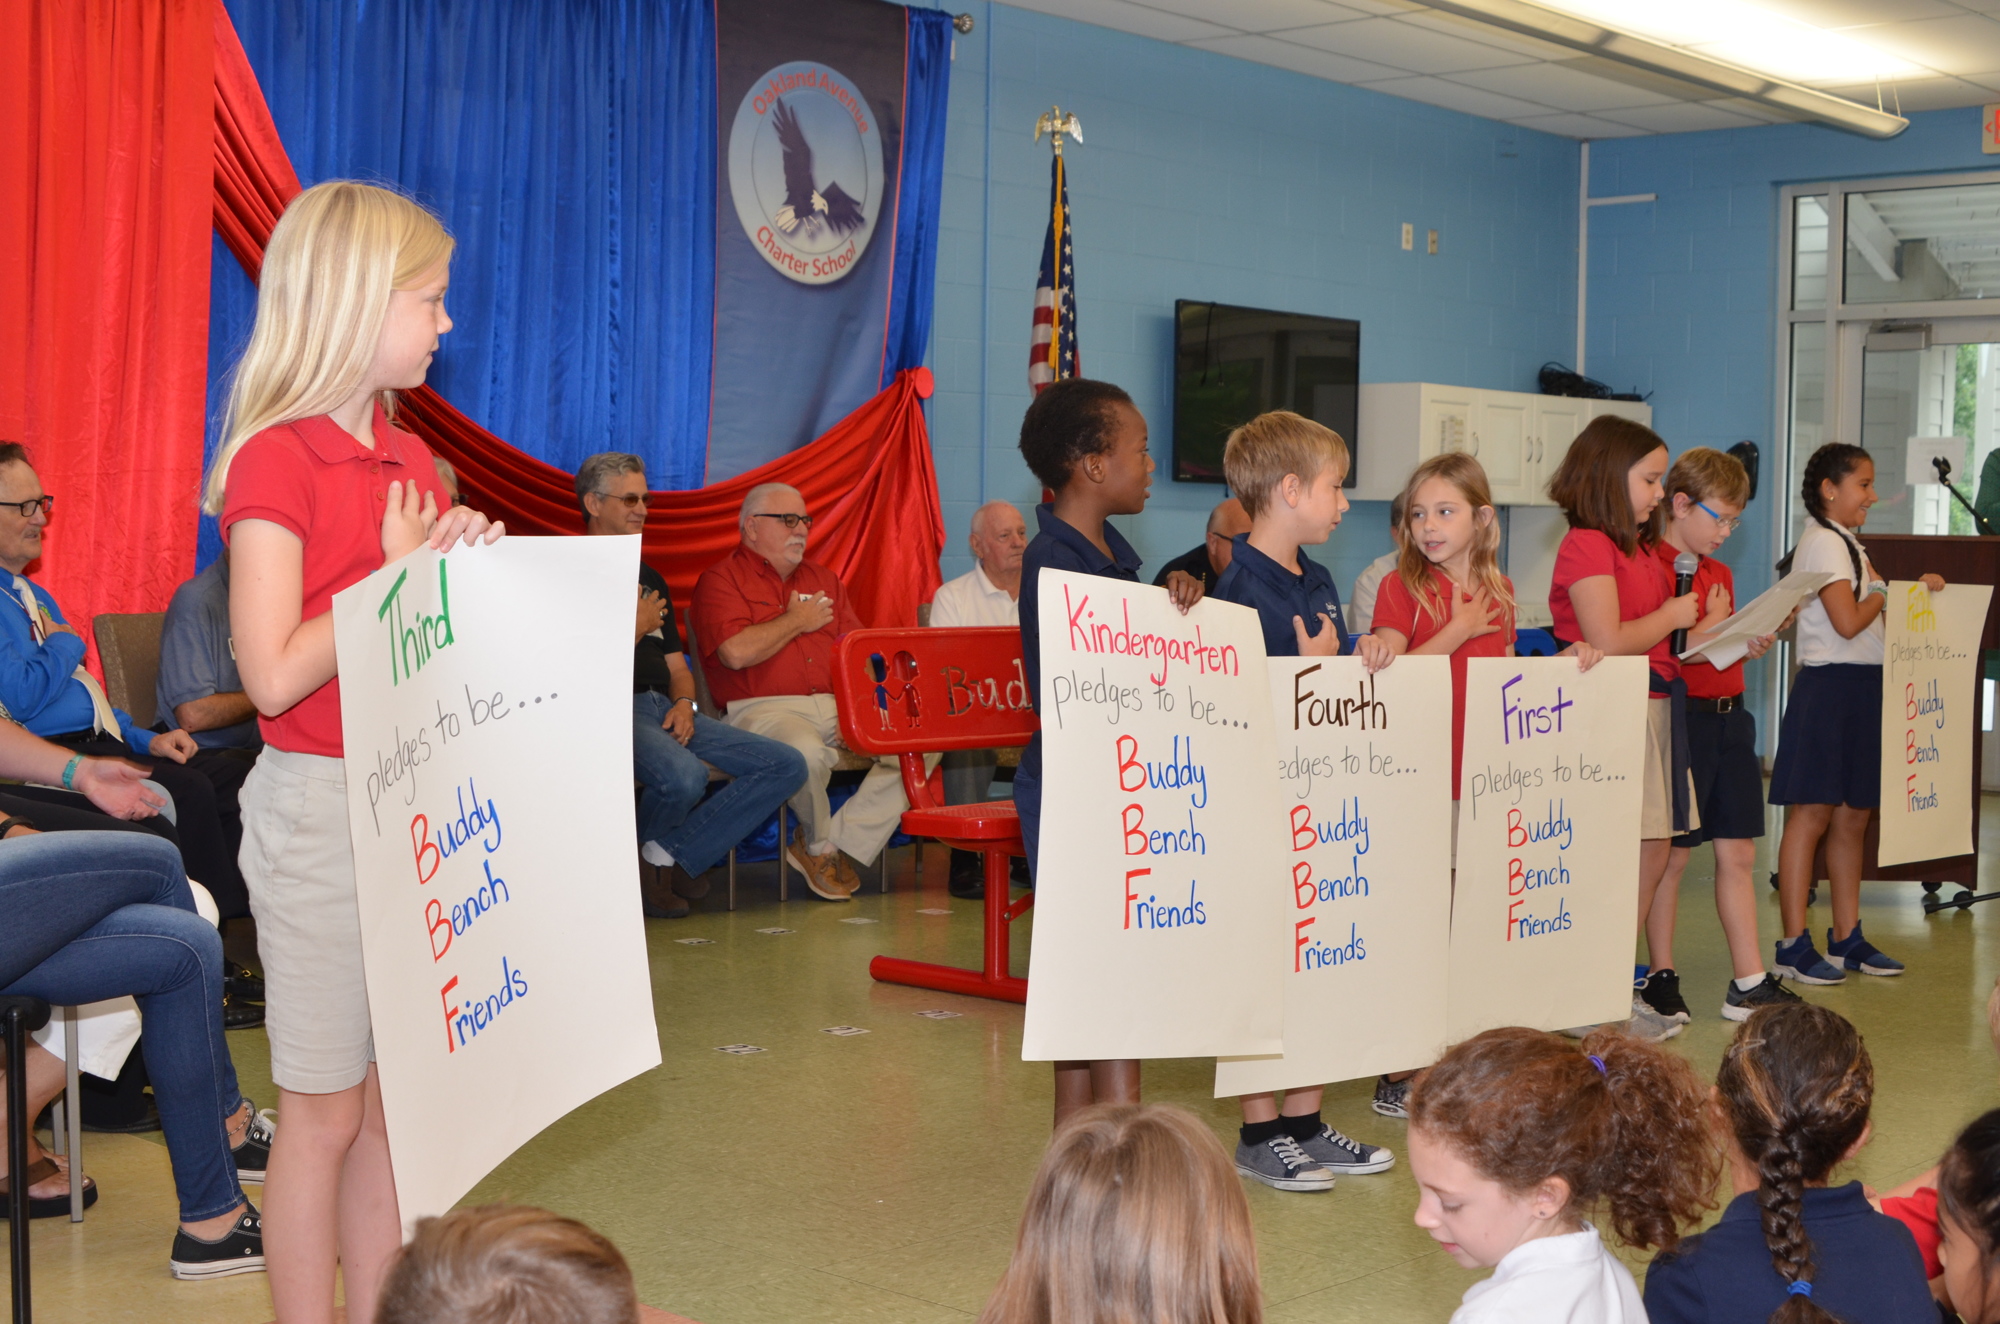 Students take the pledge to follow the rules of the Buddy Benches.